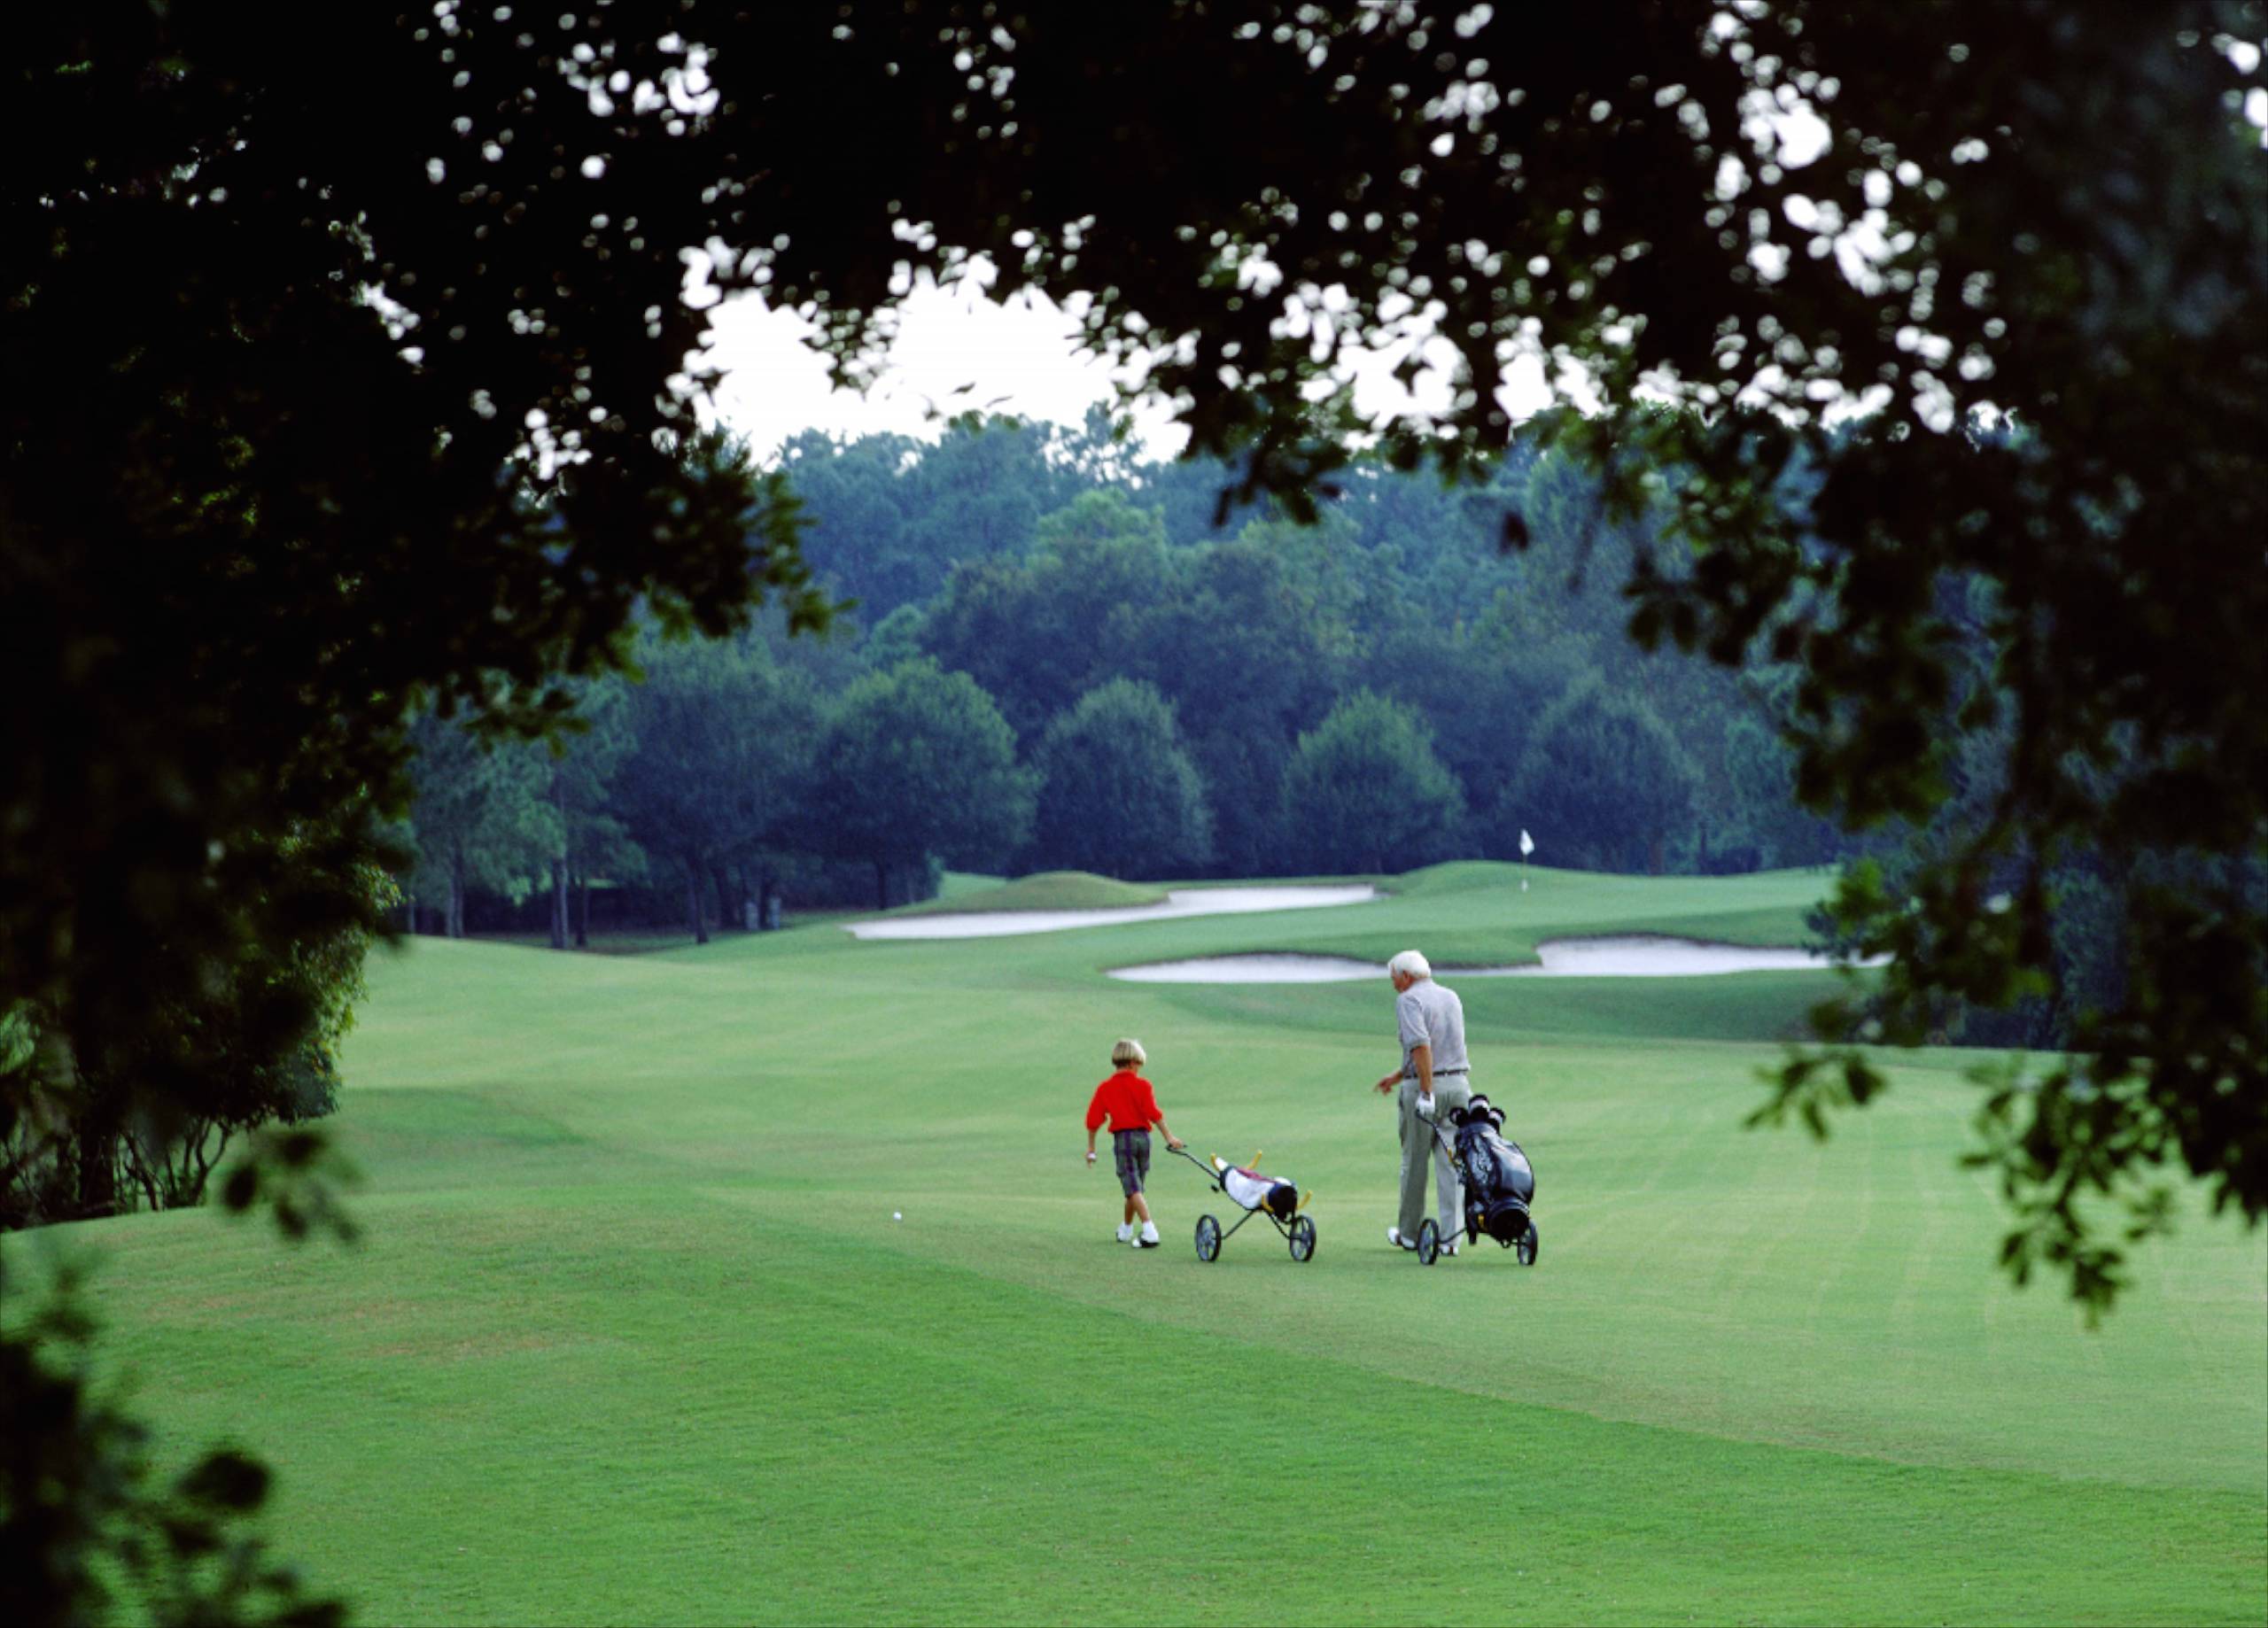 New 'Play Around the World' golf promotion saves up to 30 percent on green fees